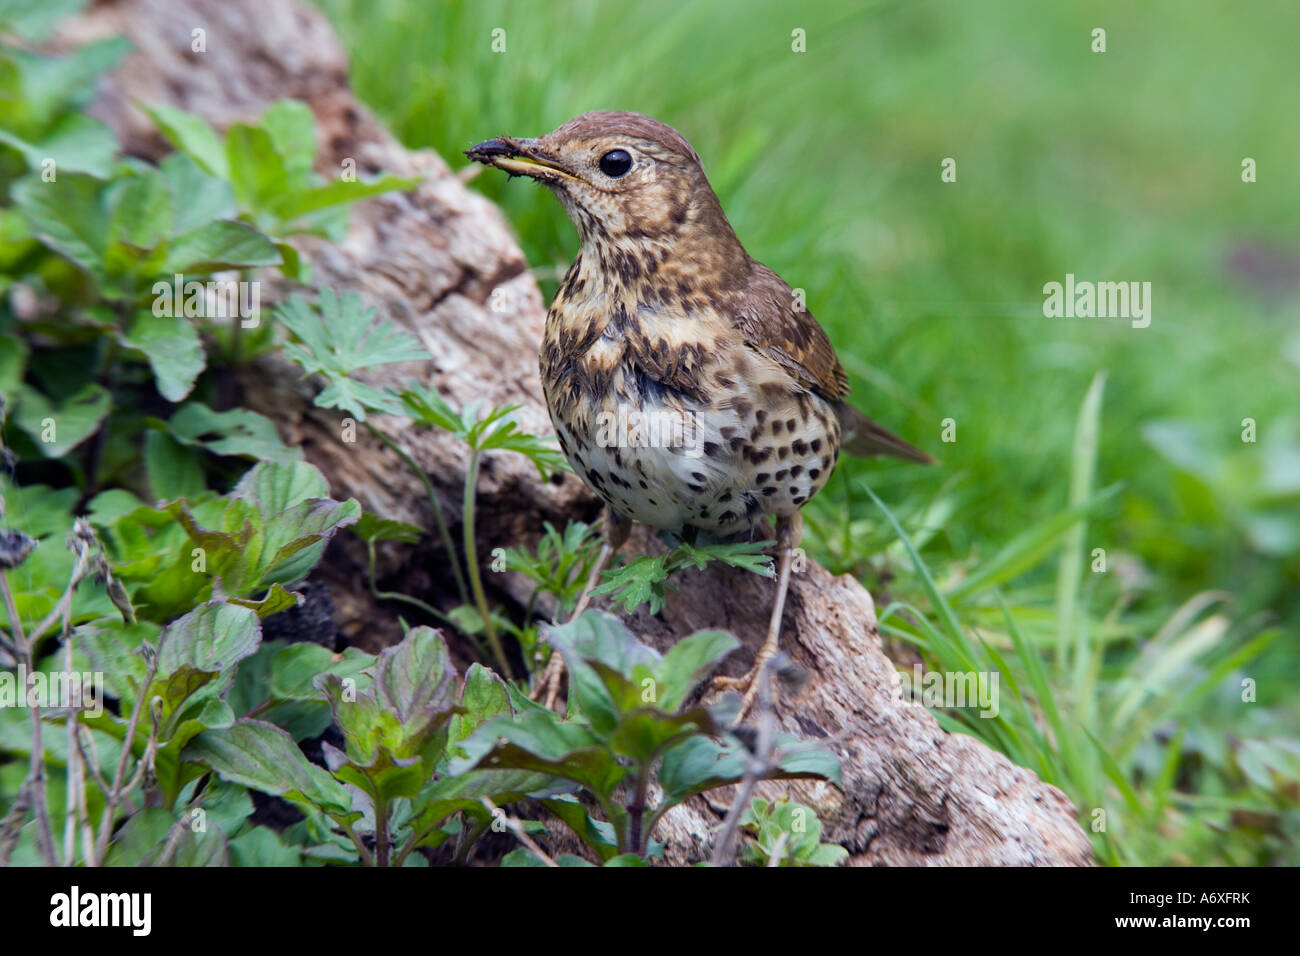 Song thrush Turdus philomelos standing on log looking alert with nice defuse background Potton Bedfordshire Stock Photo